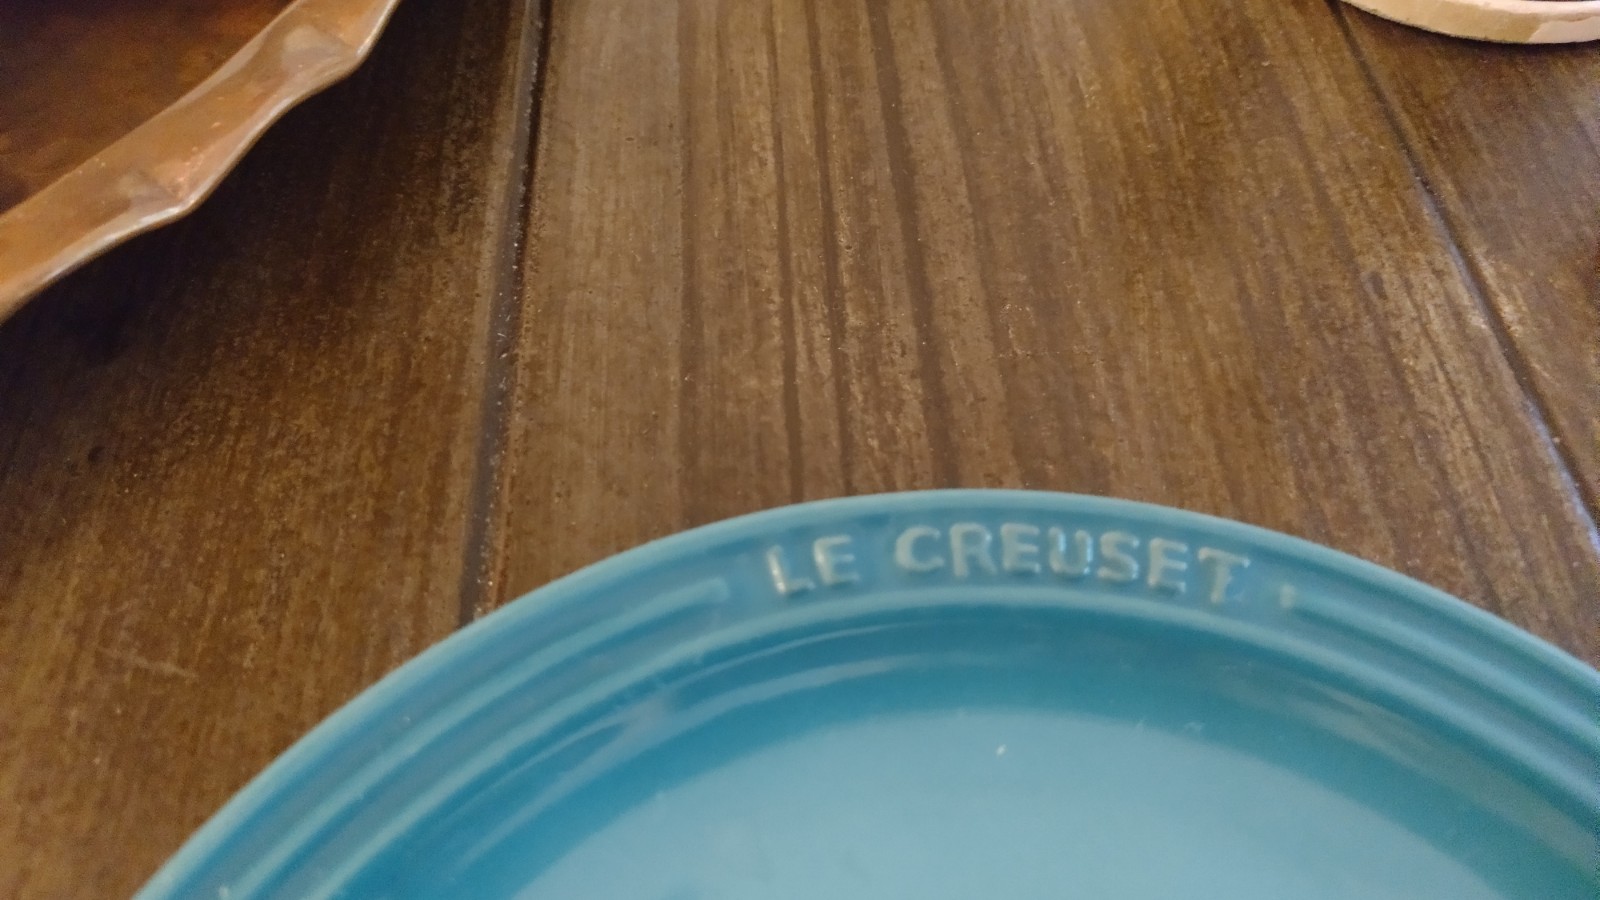 picture of the Le Creuset plates on the tables.